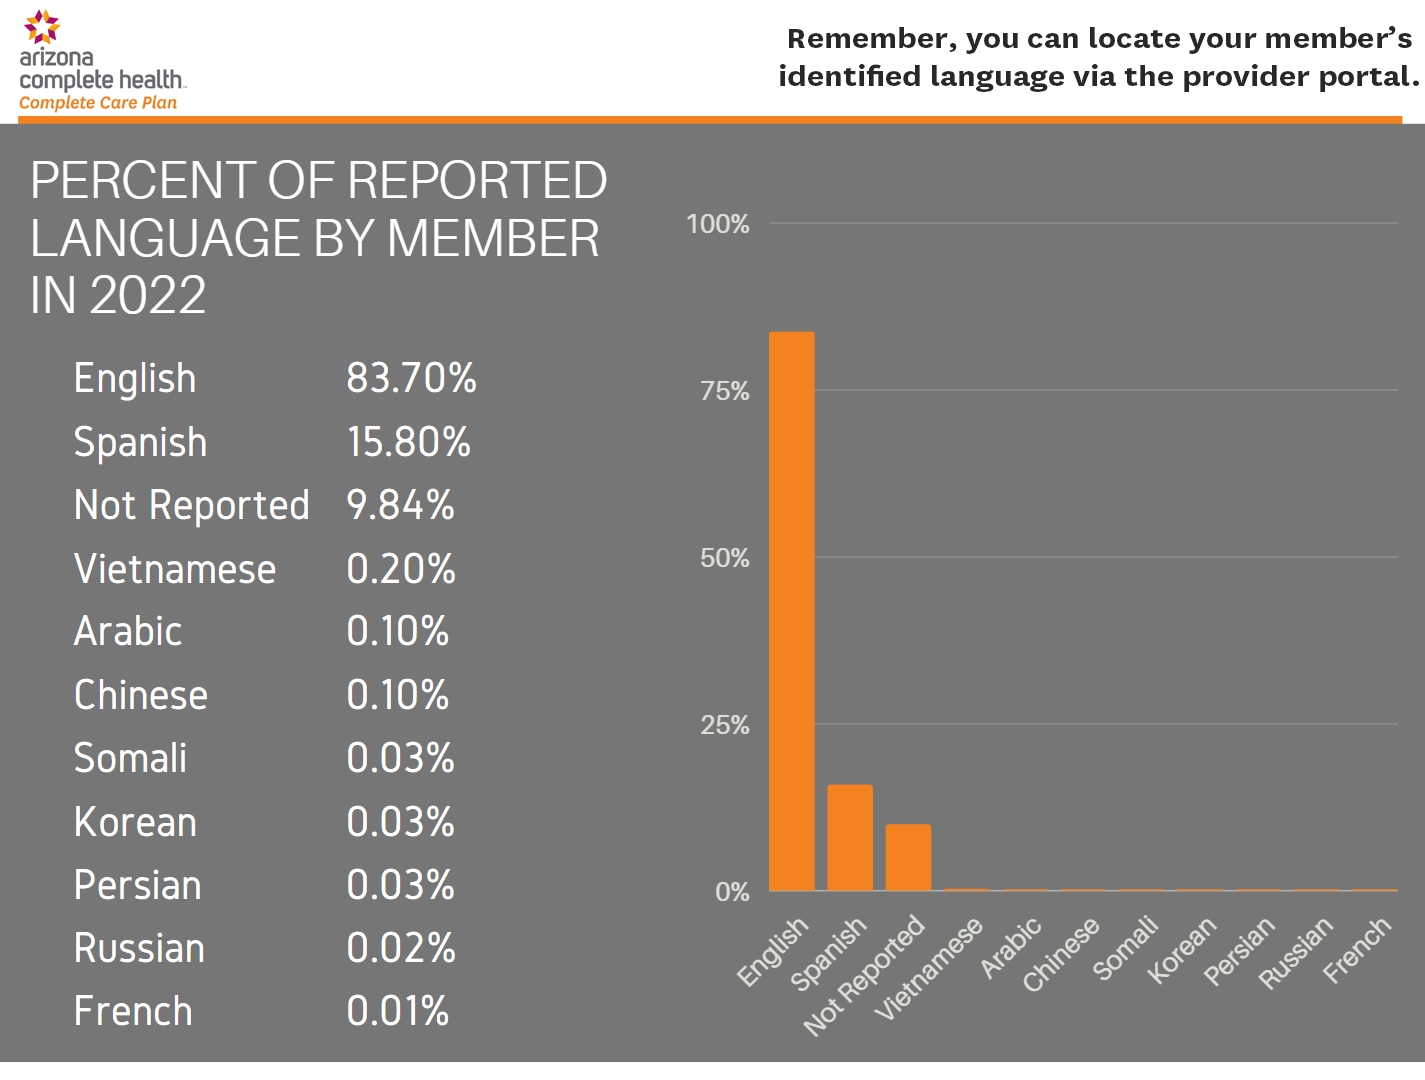 Percent of Reported Language by Member in 2022	  English	83.70% Spanish	15.80% Not Reported	9.84% Vietnamese	0.20% Arabic	0.10% Chinese	0.10% Somali	0.03% Korean	0.03% Persian	0.03% Russian	0.02% French	0.01% - Remember, you can locate your member’sidentified language via the provider portal.